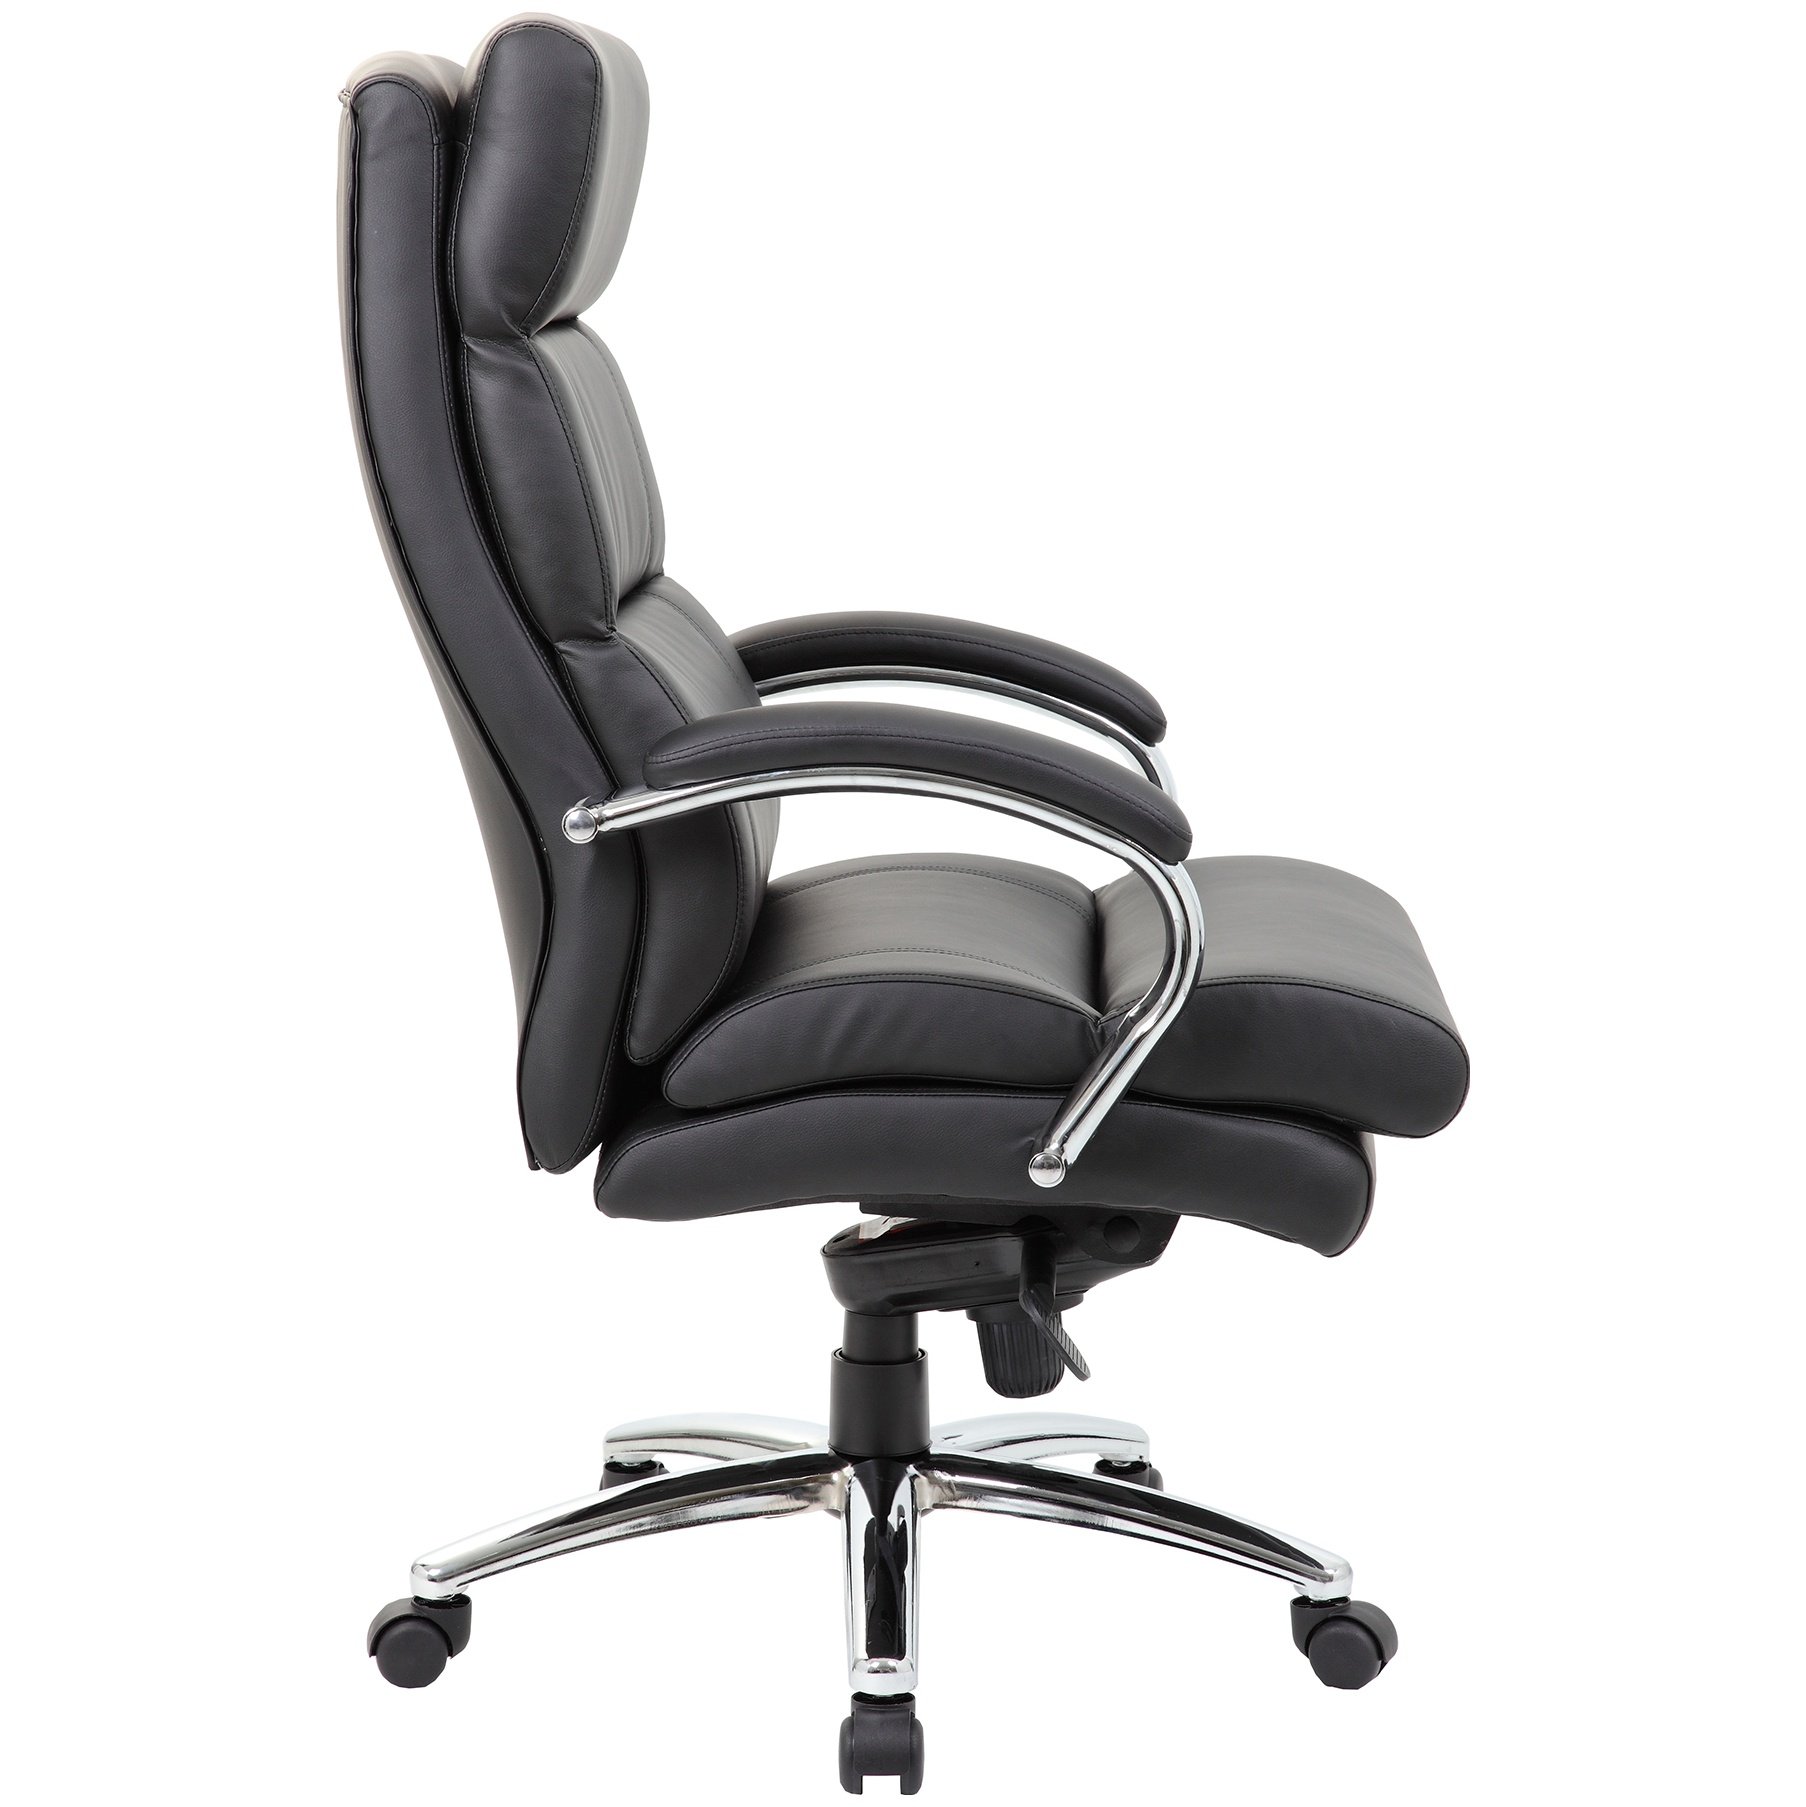 Consulat Executive Leather Office Chair Office Chairs Office